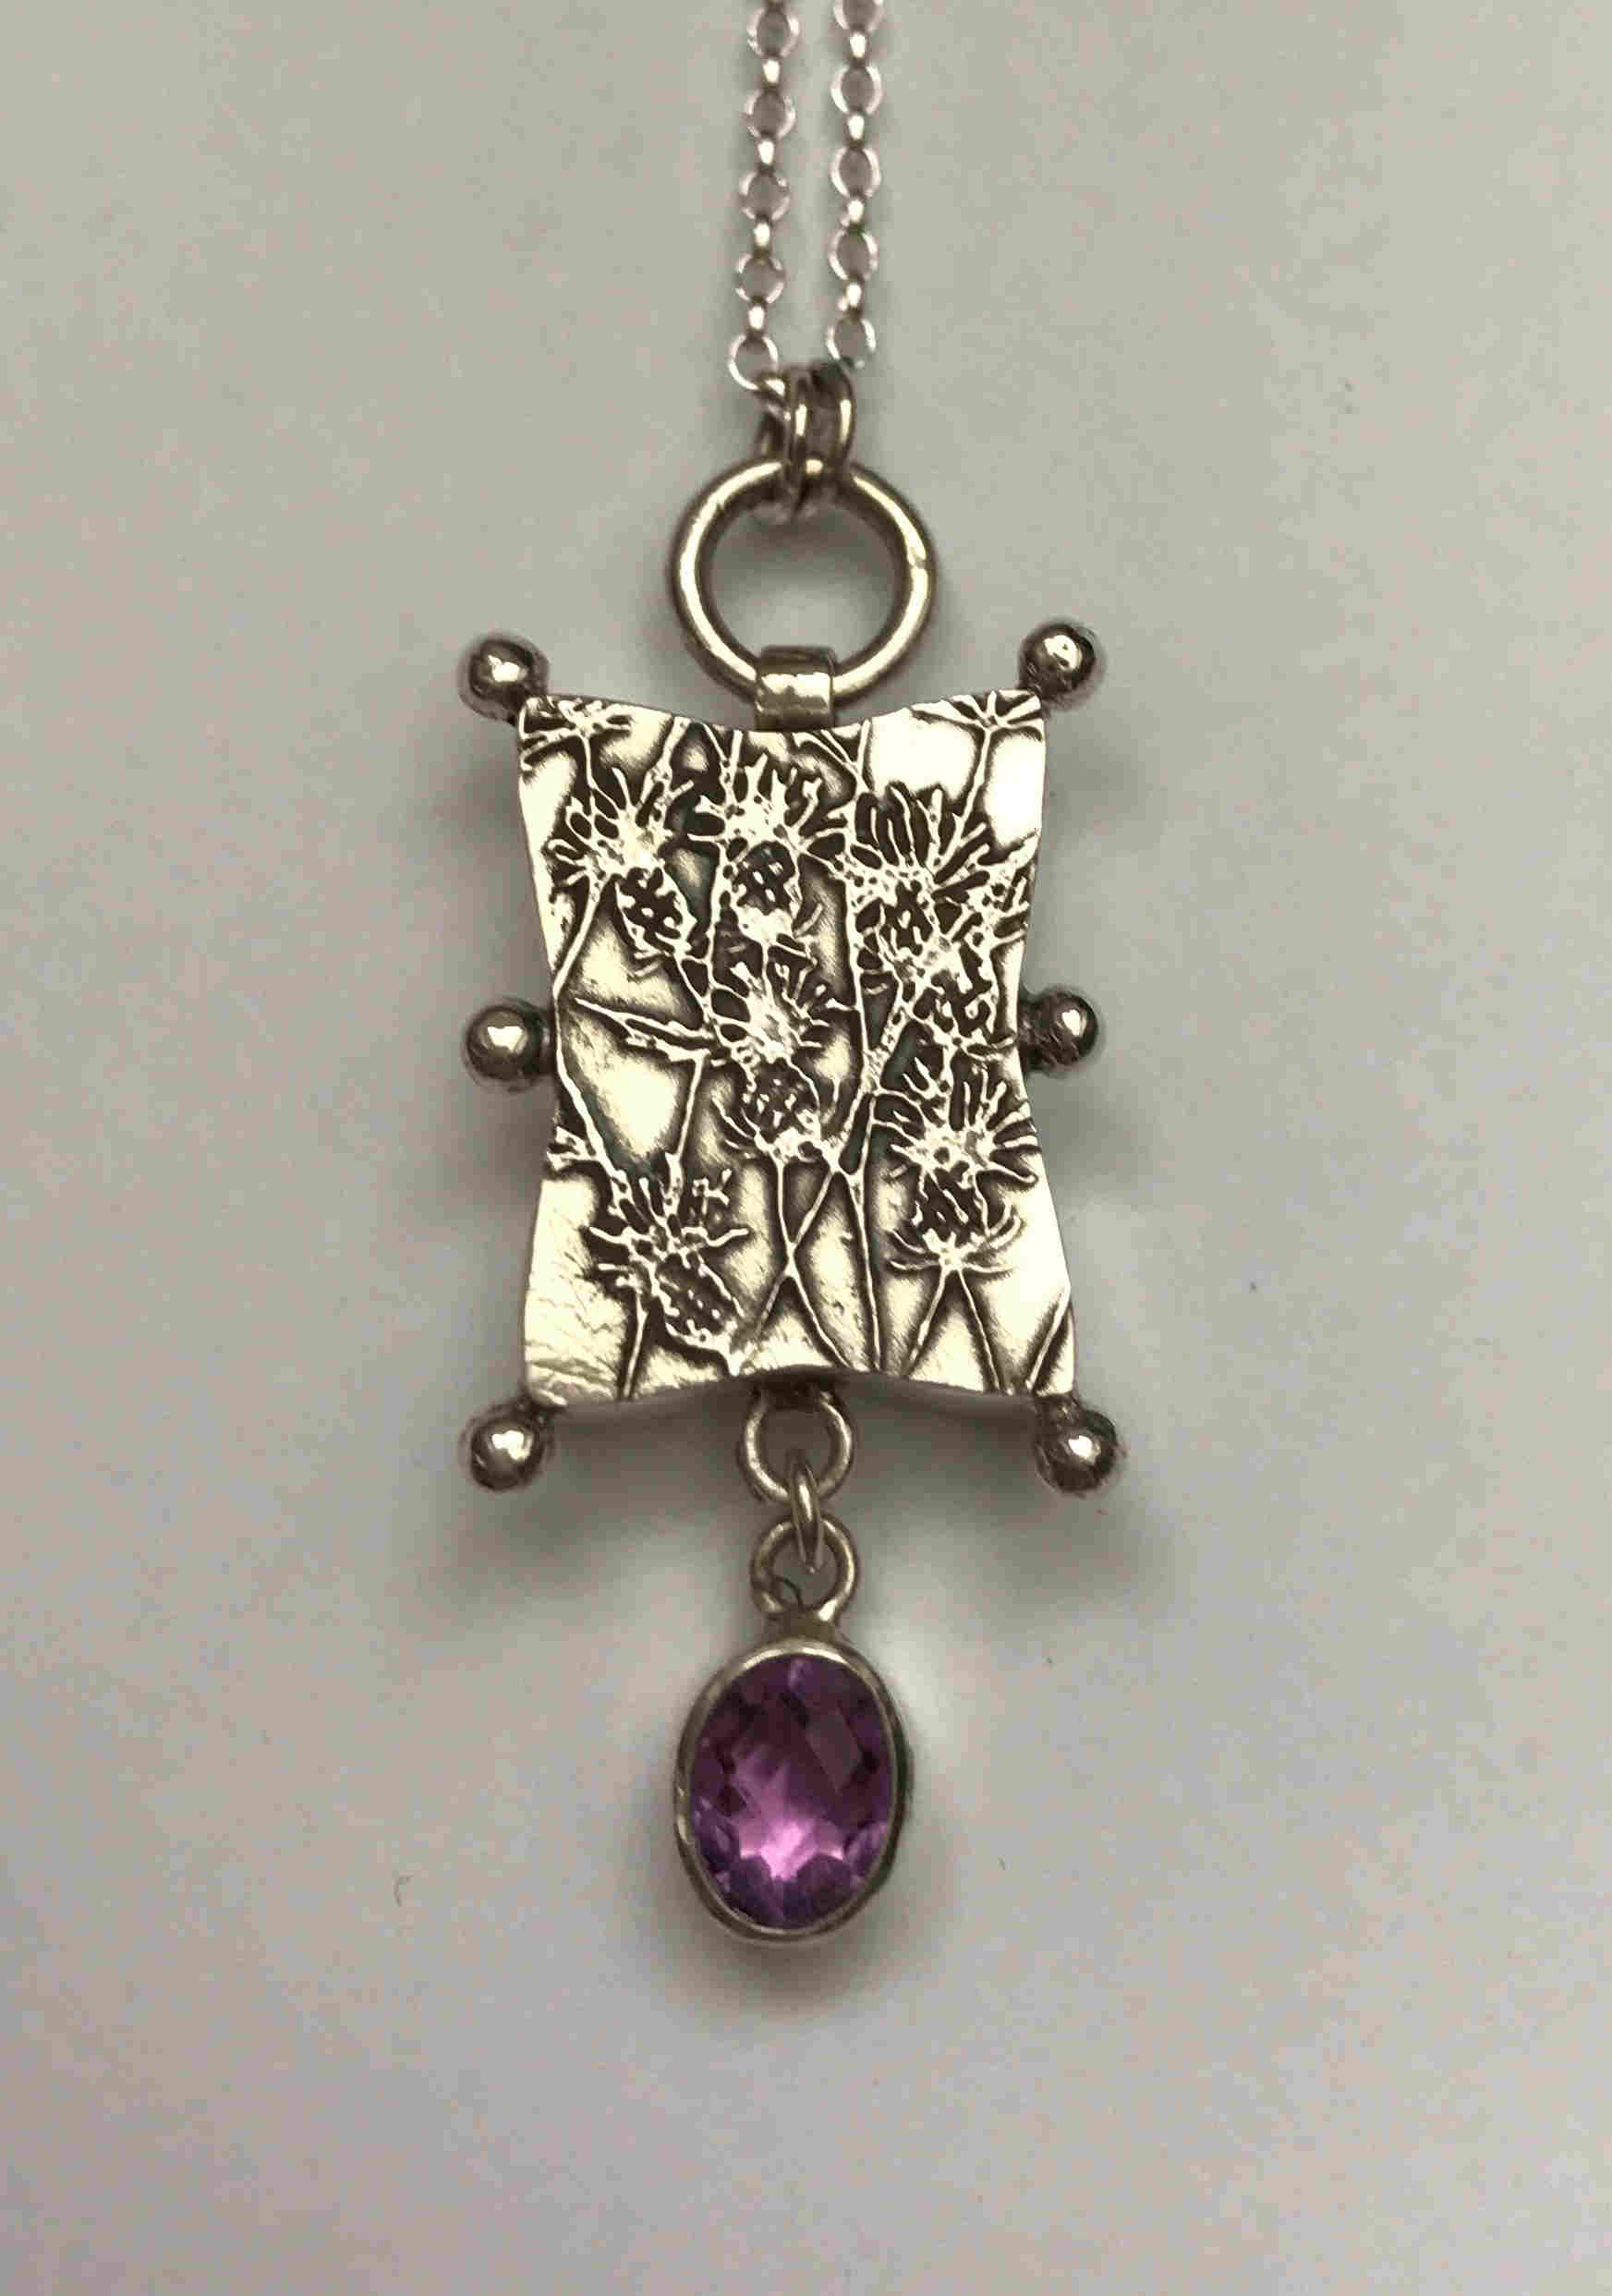 'Sterling Silver Rectangular Box Necklace with Amethyst' by artist Carol Docherty